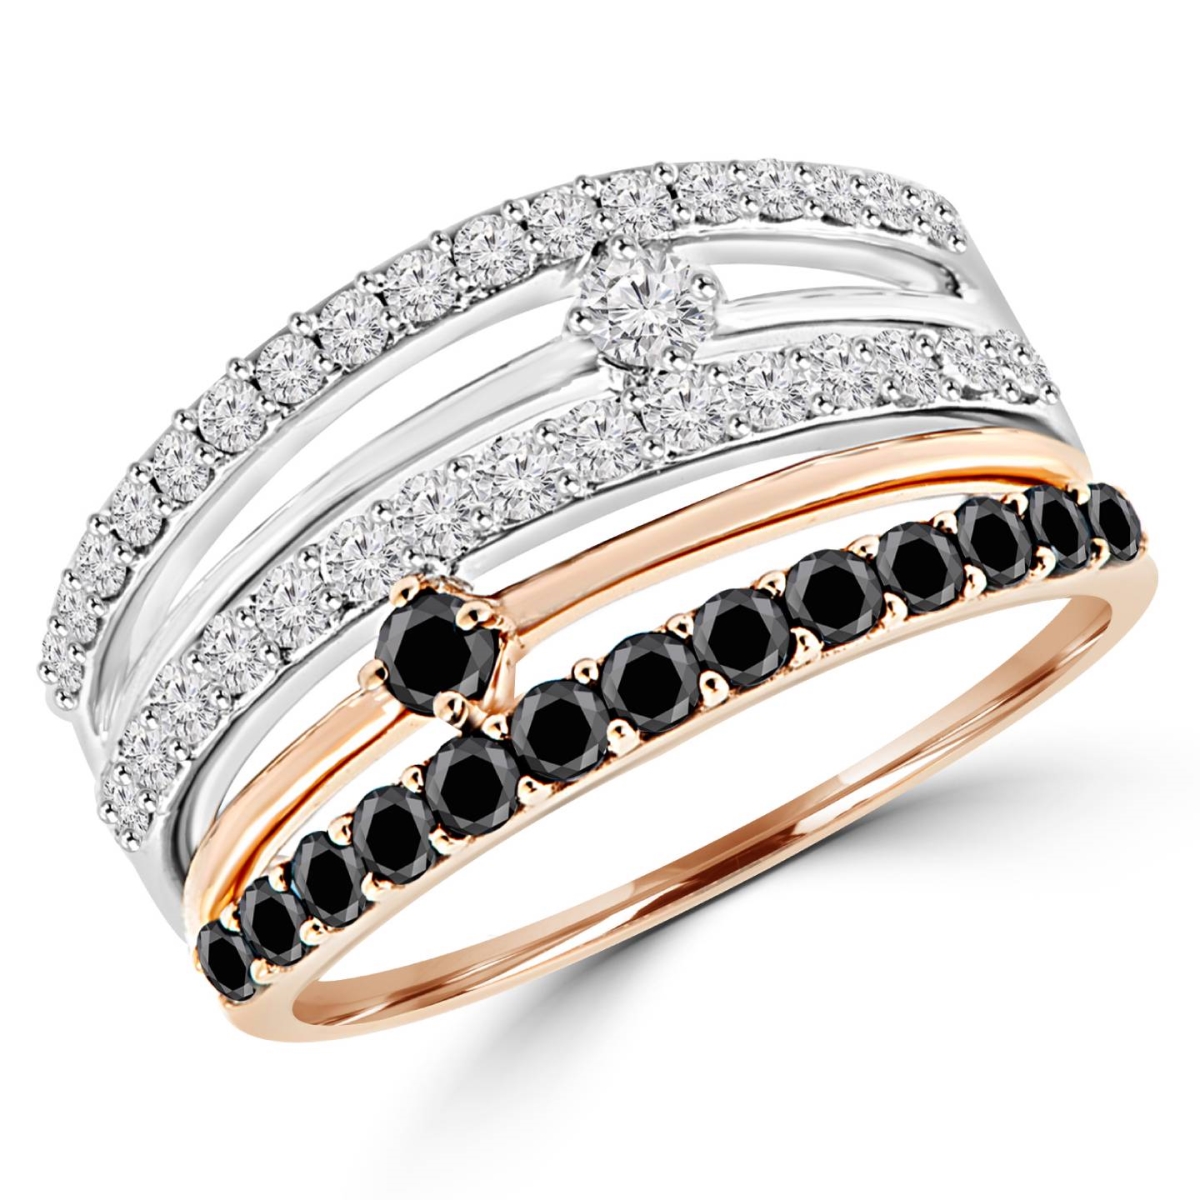 Picture of Majesty Diamonds MDR140001-3.25 0.8 CTW 5-row Black & White Diamond Fashion Cocktail Ring in 14K White & Rose Gold - Size 3.25